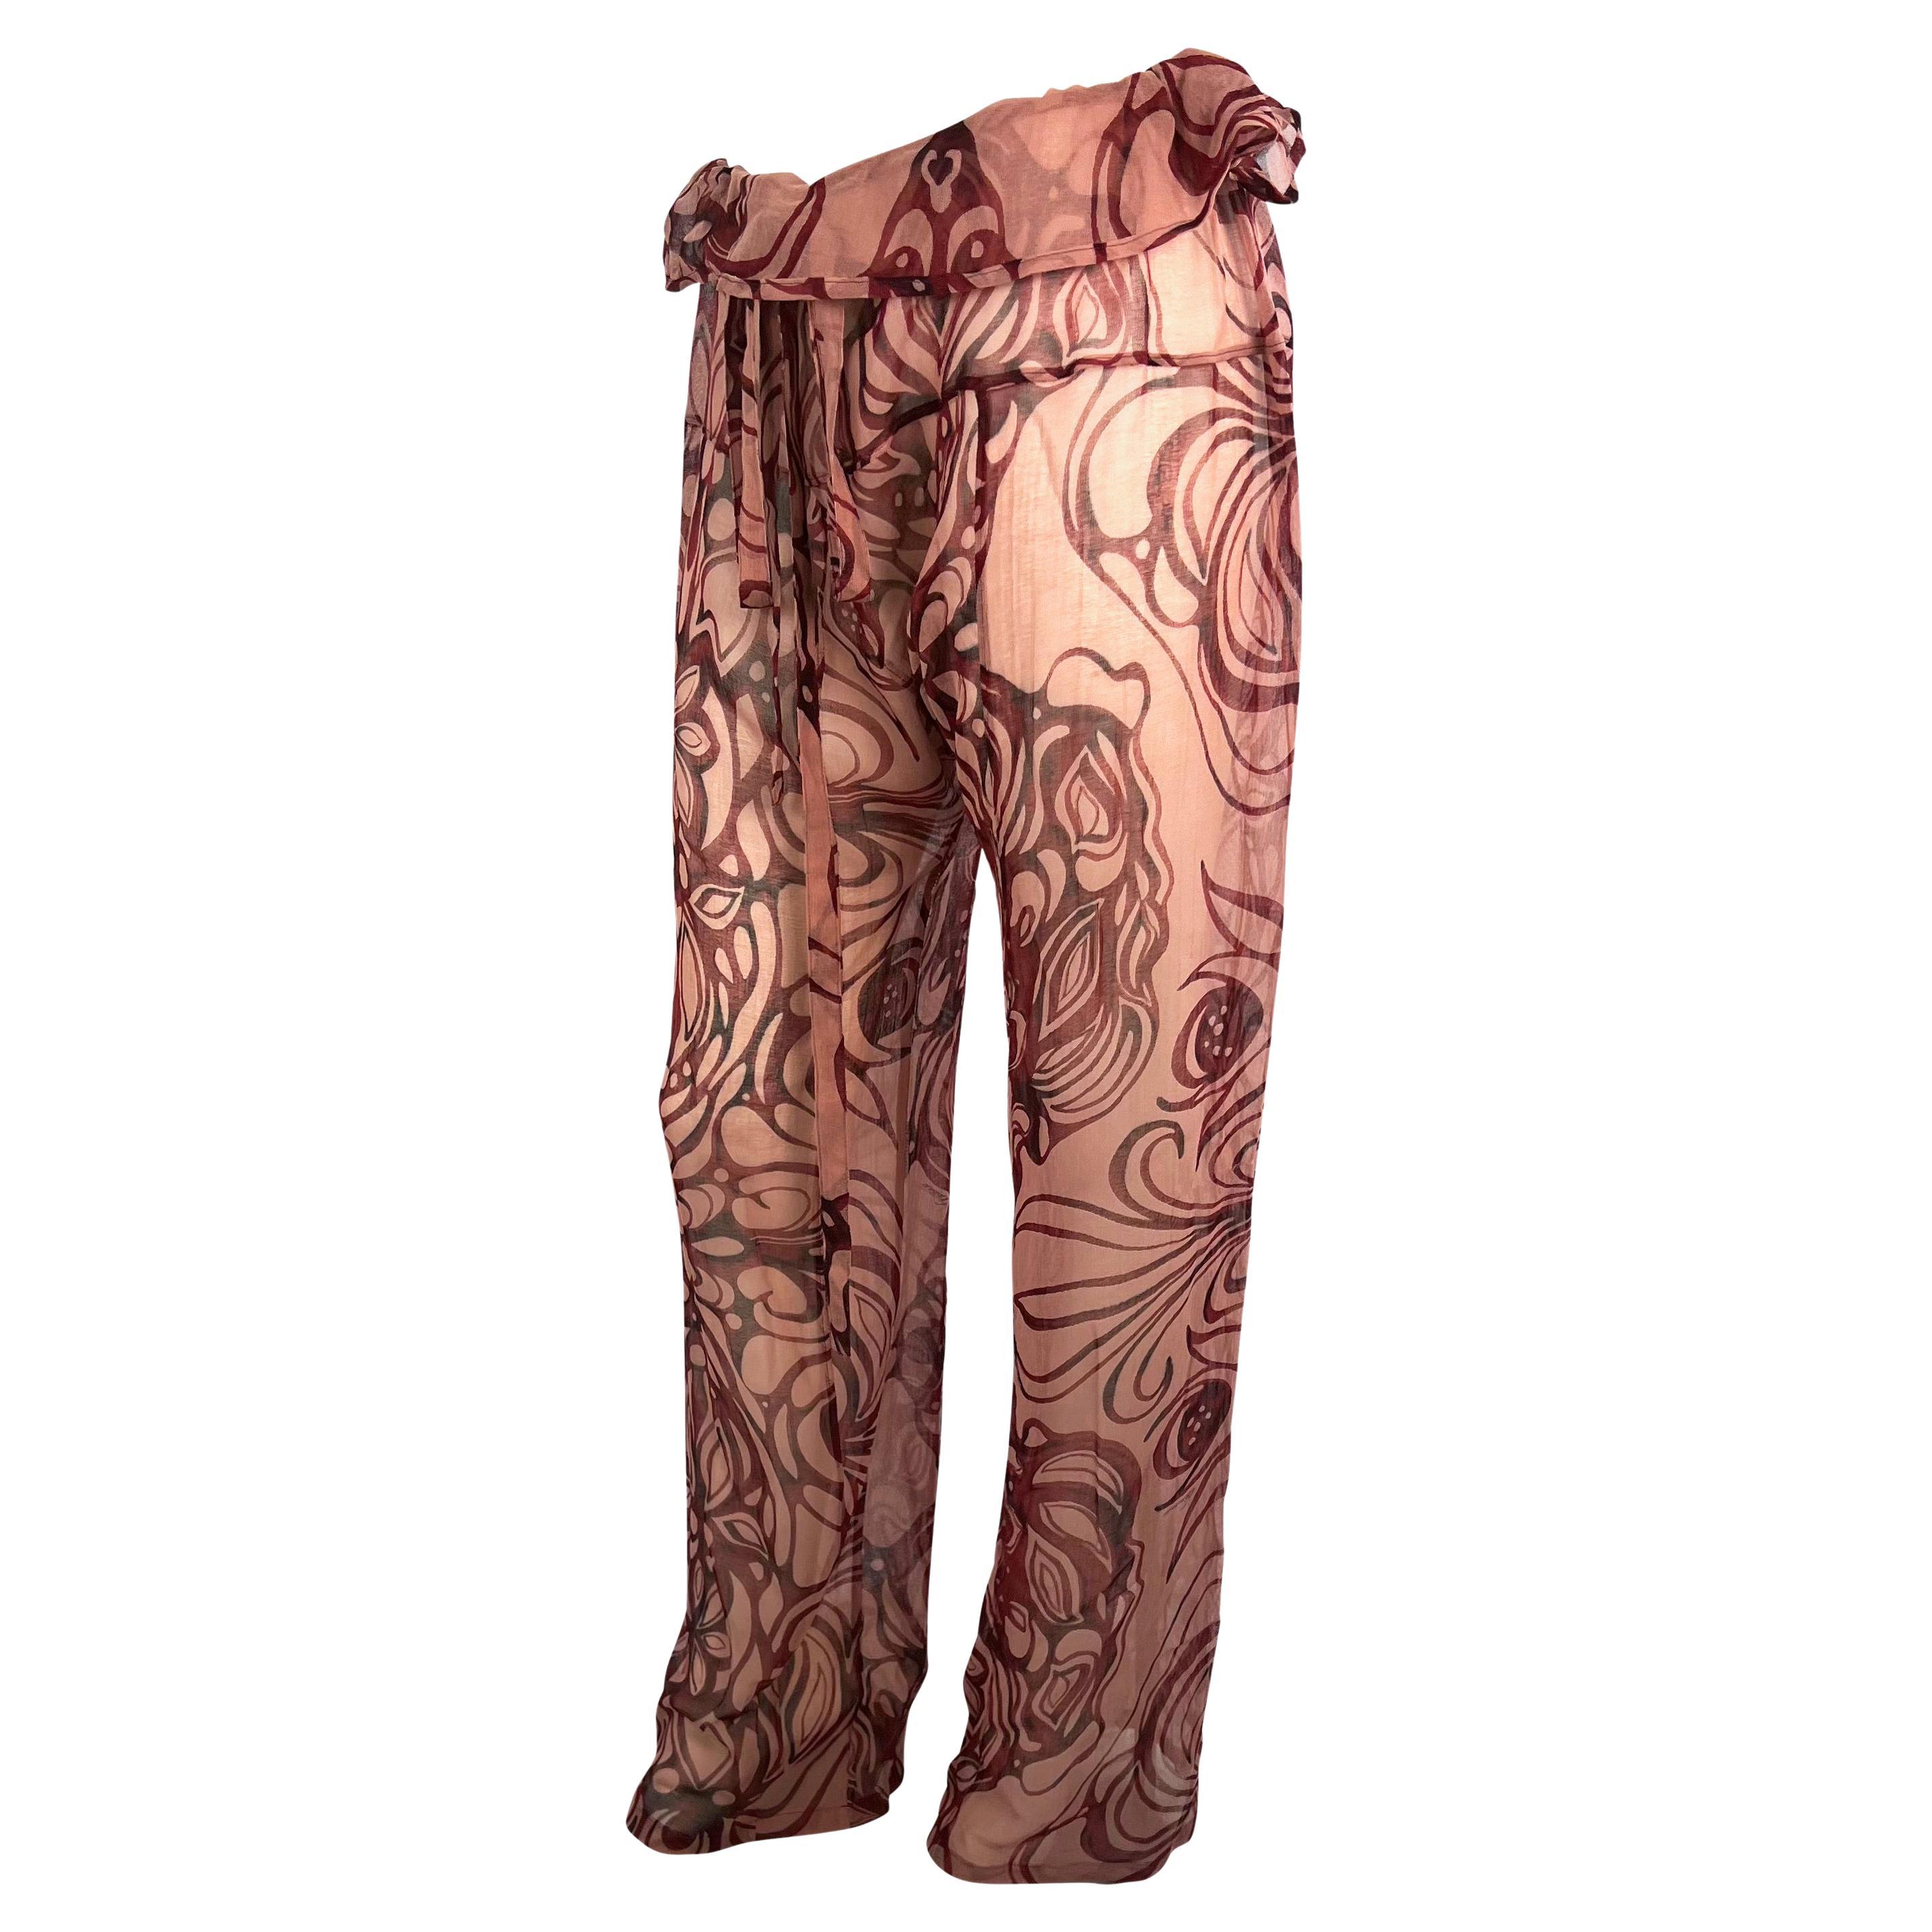 Women's S/S 2002 Gucci by Tom Ford Sheer Floral Tattoo Beach Coverup Pant Set NWT For Sale